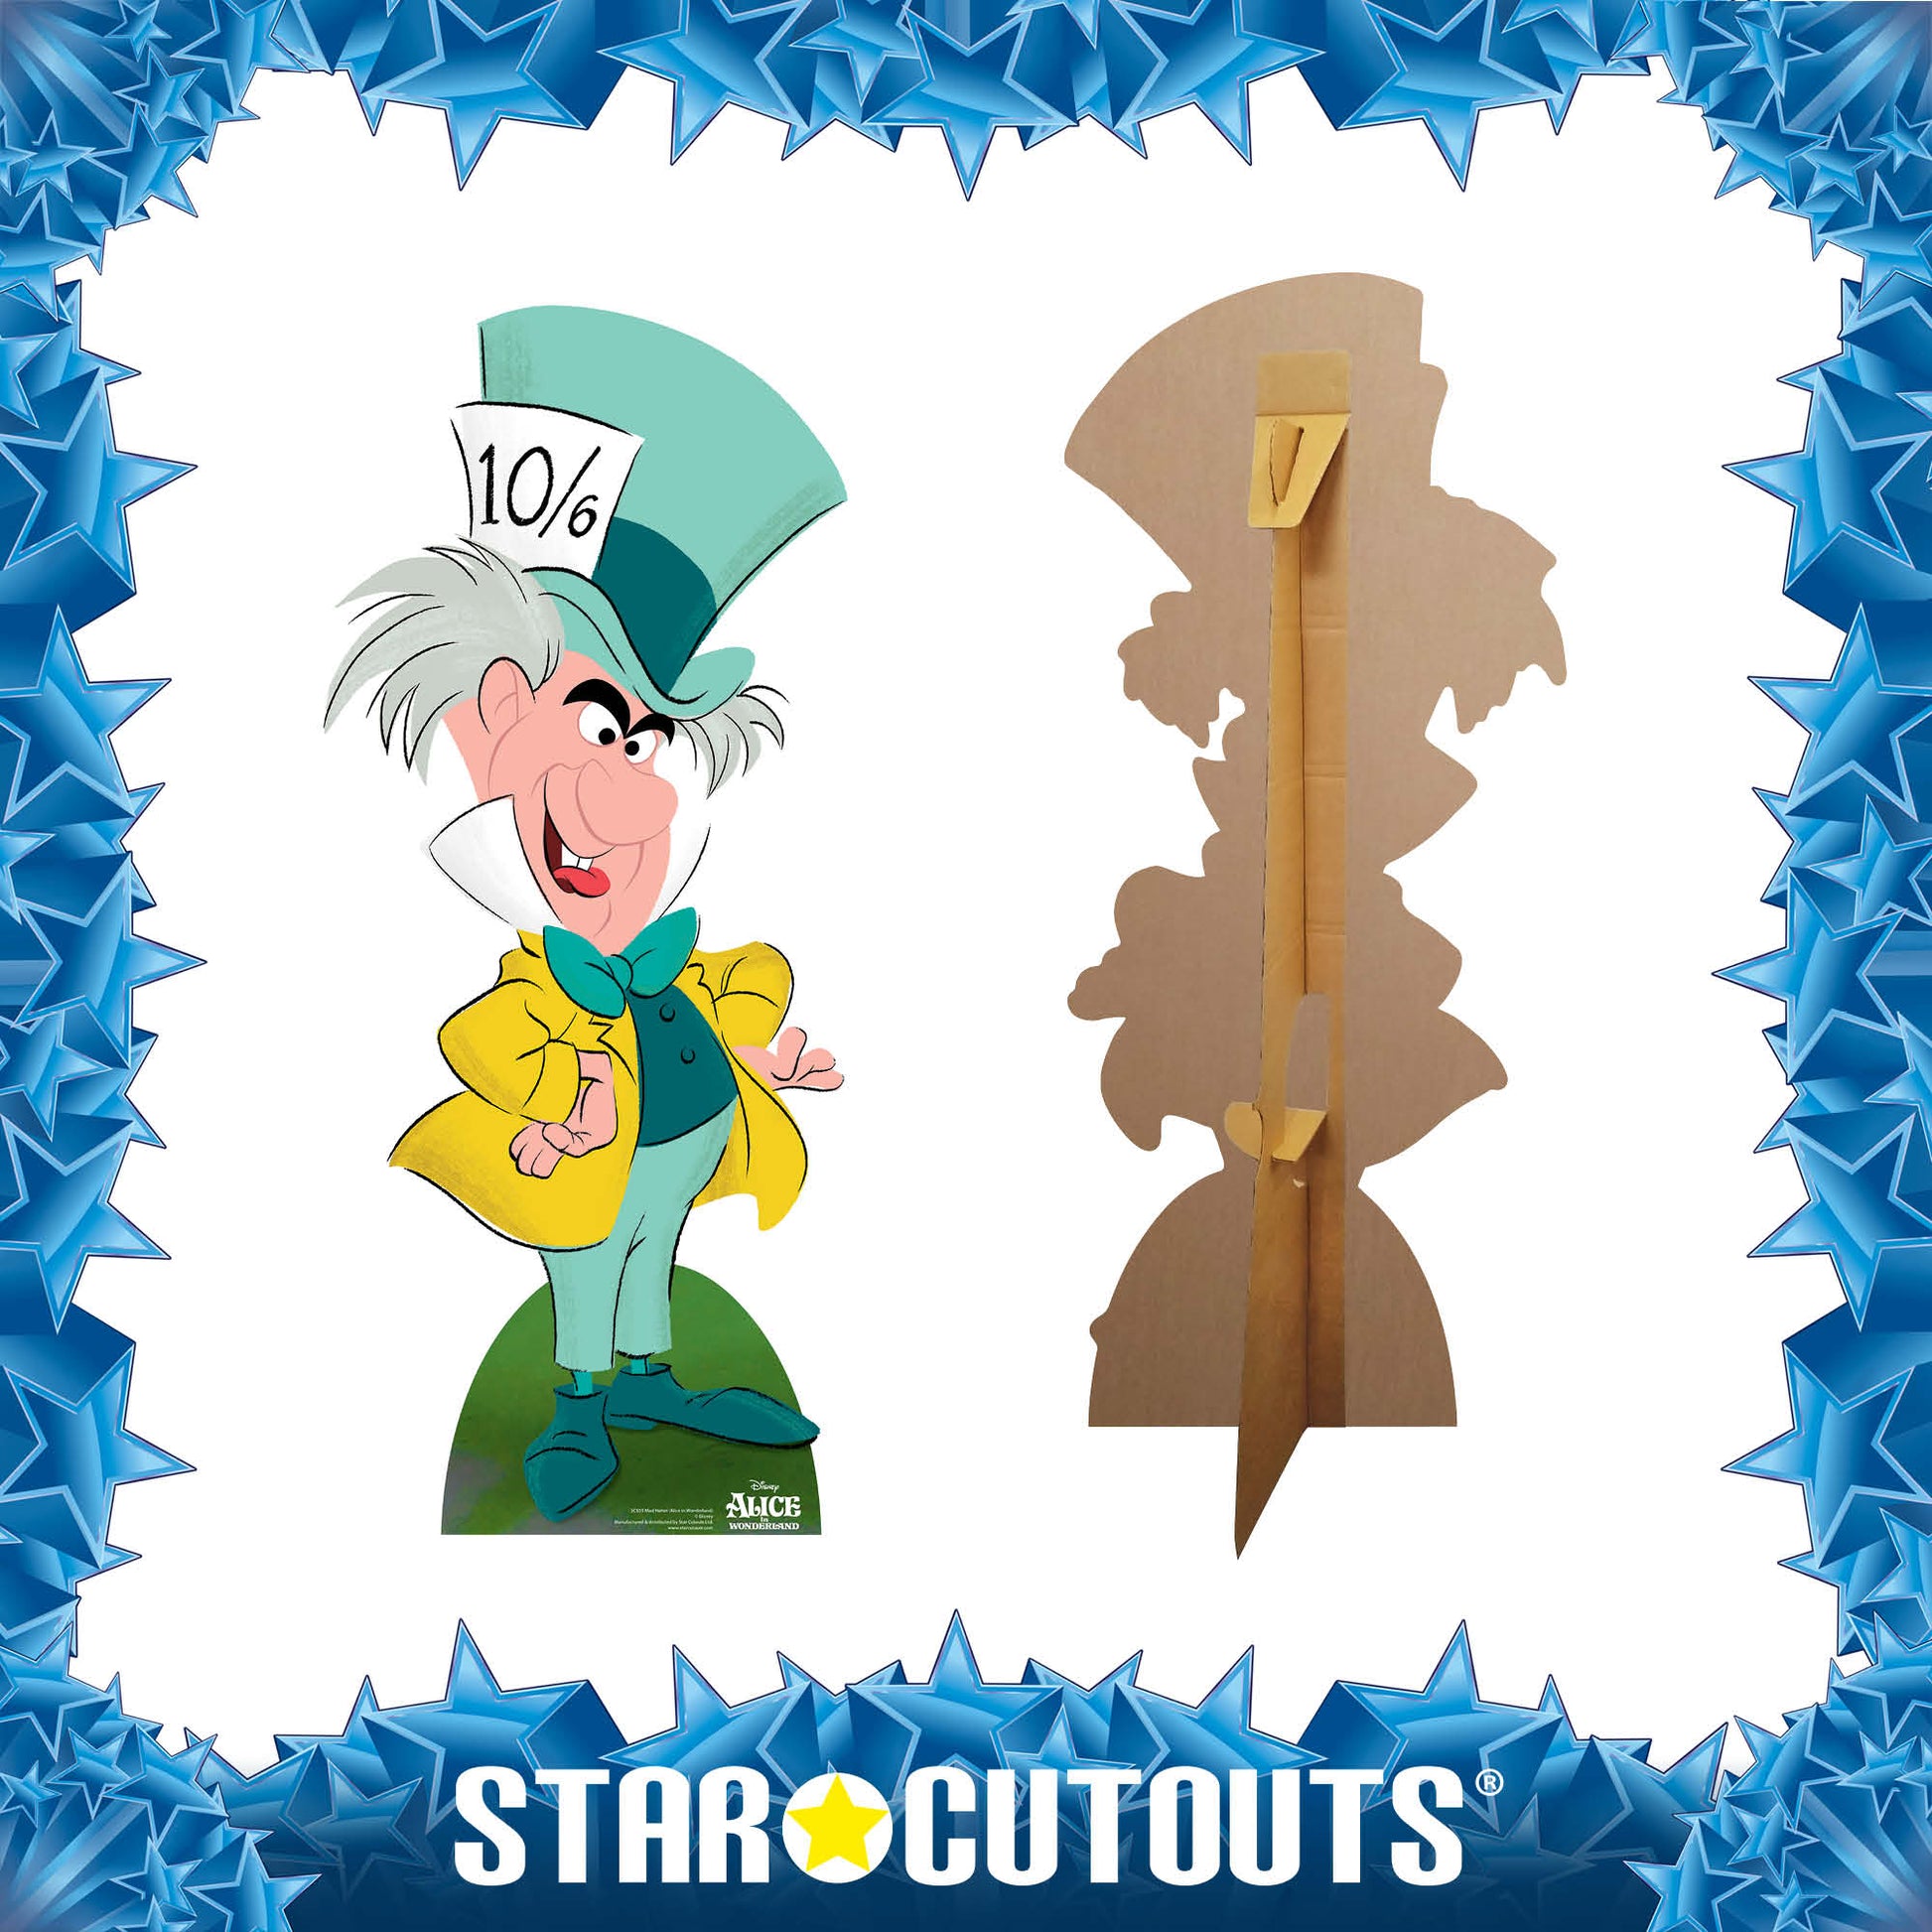 Alice In Wonderland Mad Hatter's Tea Party Child Size Stand-in Cardboard  Cutout / Standee